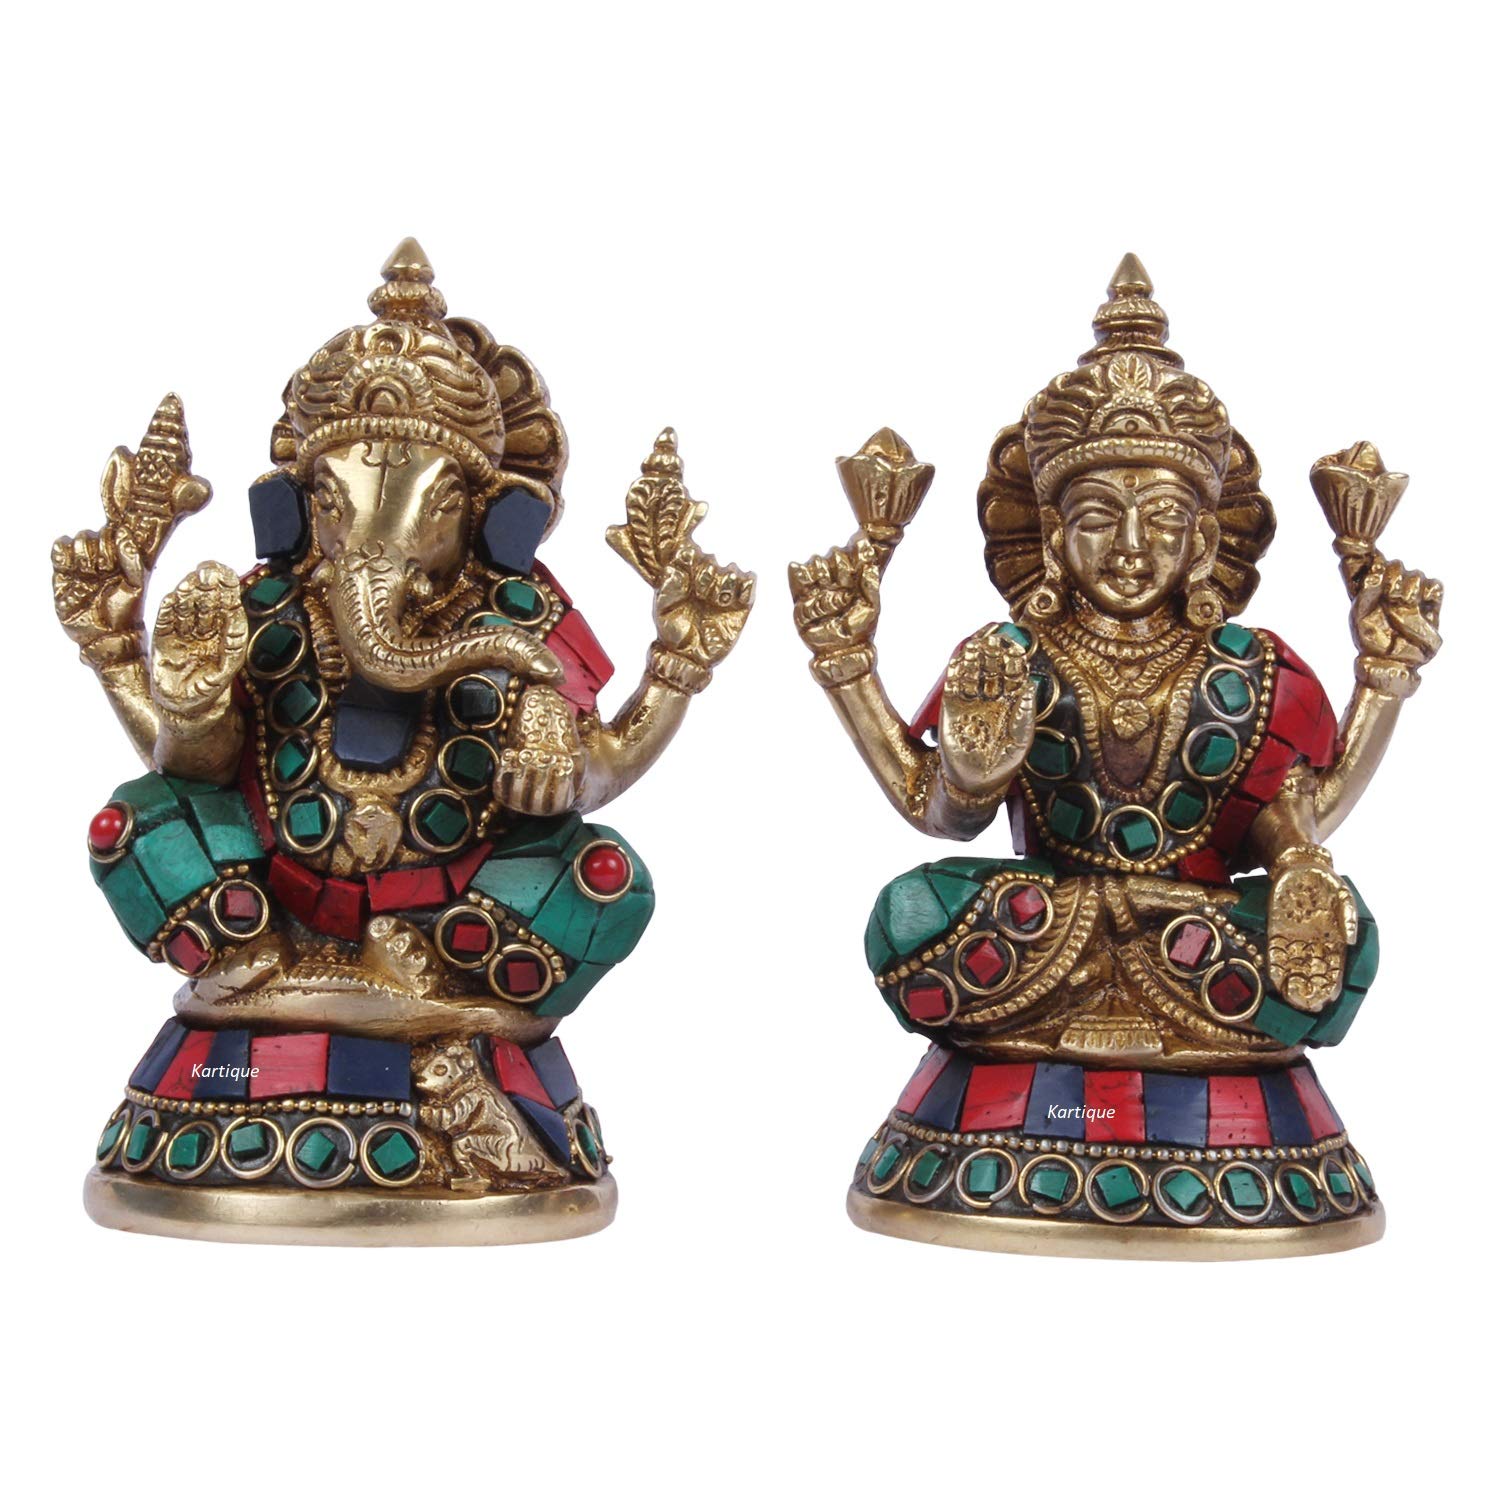 Buy KRISHNAGALLERY1 Marble Dust Ganesh Ji Murti Ganesh Statue for Pooja  Room Home Temple Office Decor 7 Inch (Multi) Online at Low Prices in India  - Amazon.in